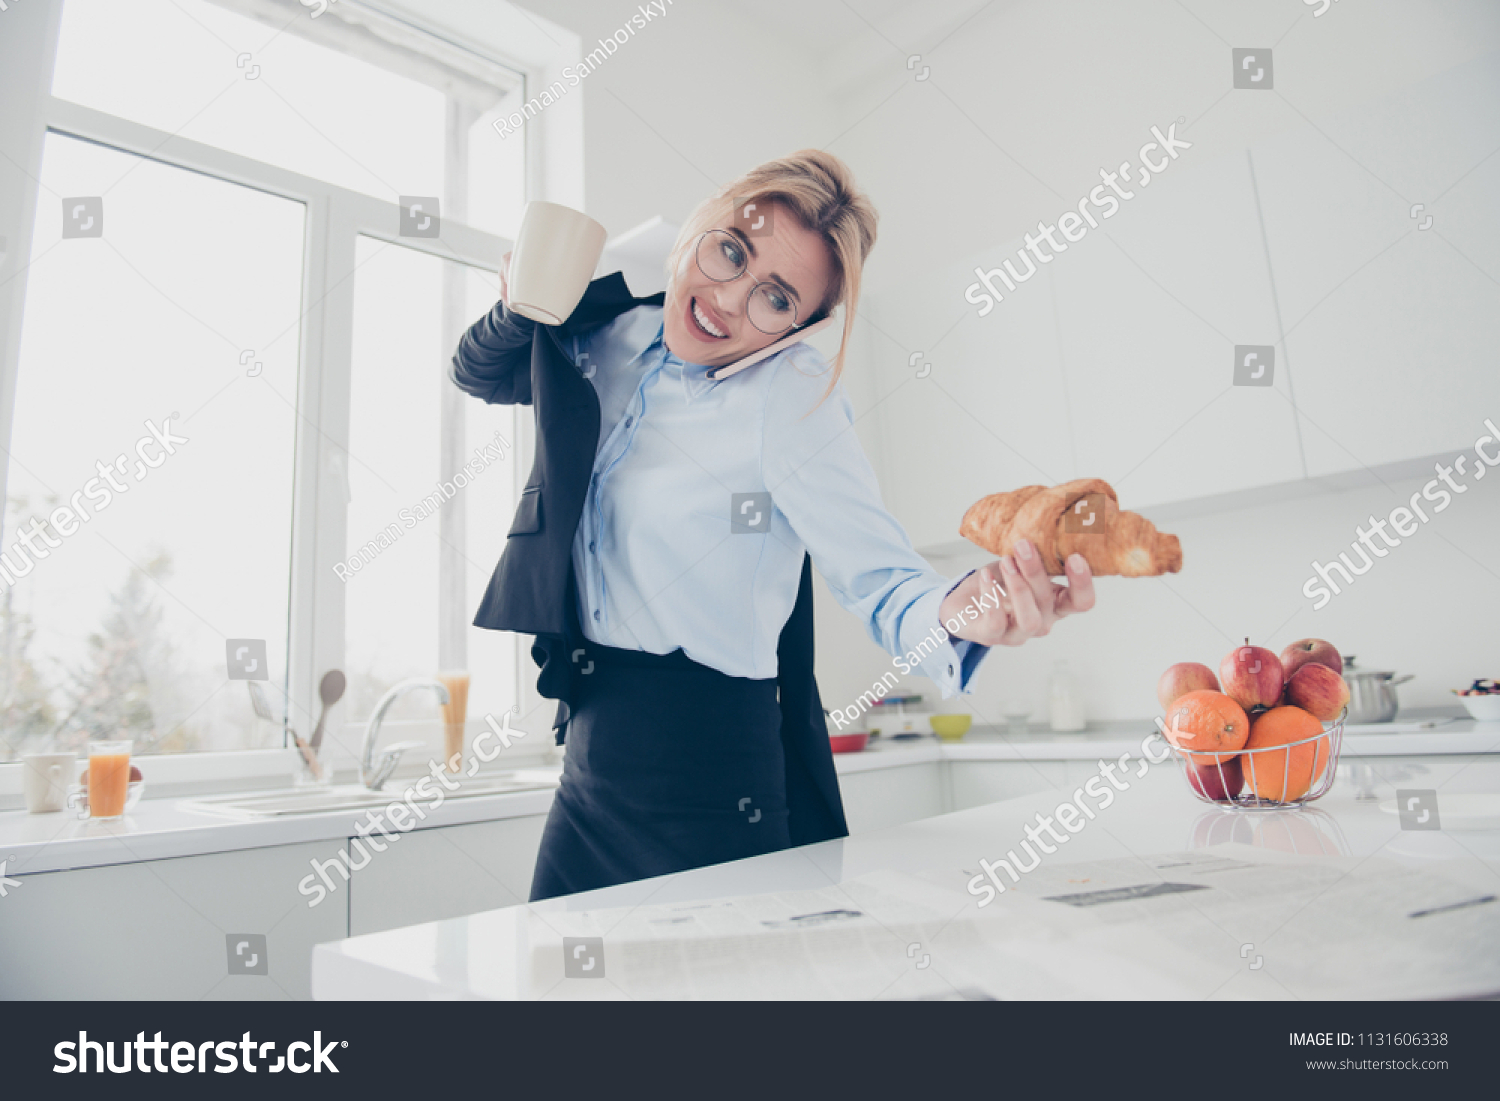 Adorable busy attractive charming beautiful smiling lady office executive worker wearing spectacles in hurry early in the morning talking on the phone having a drink and croissant in kitchen #1131606338